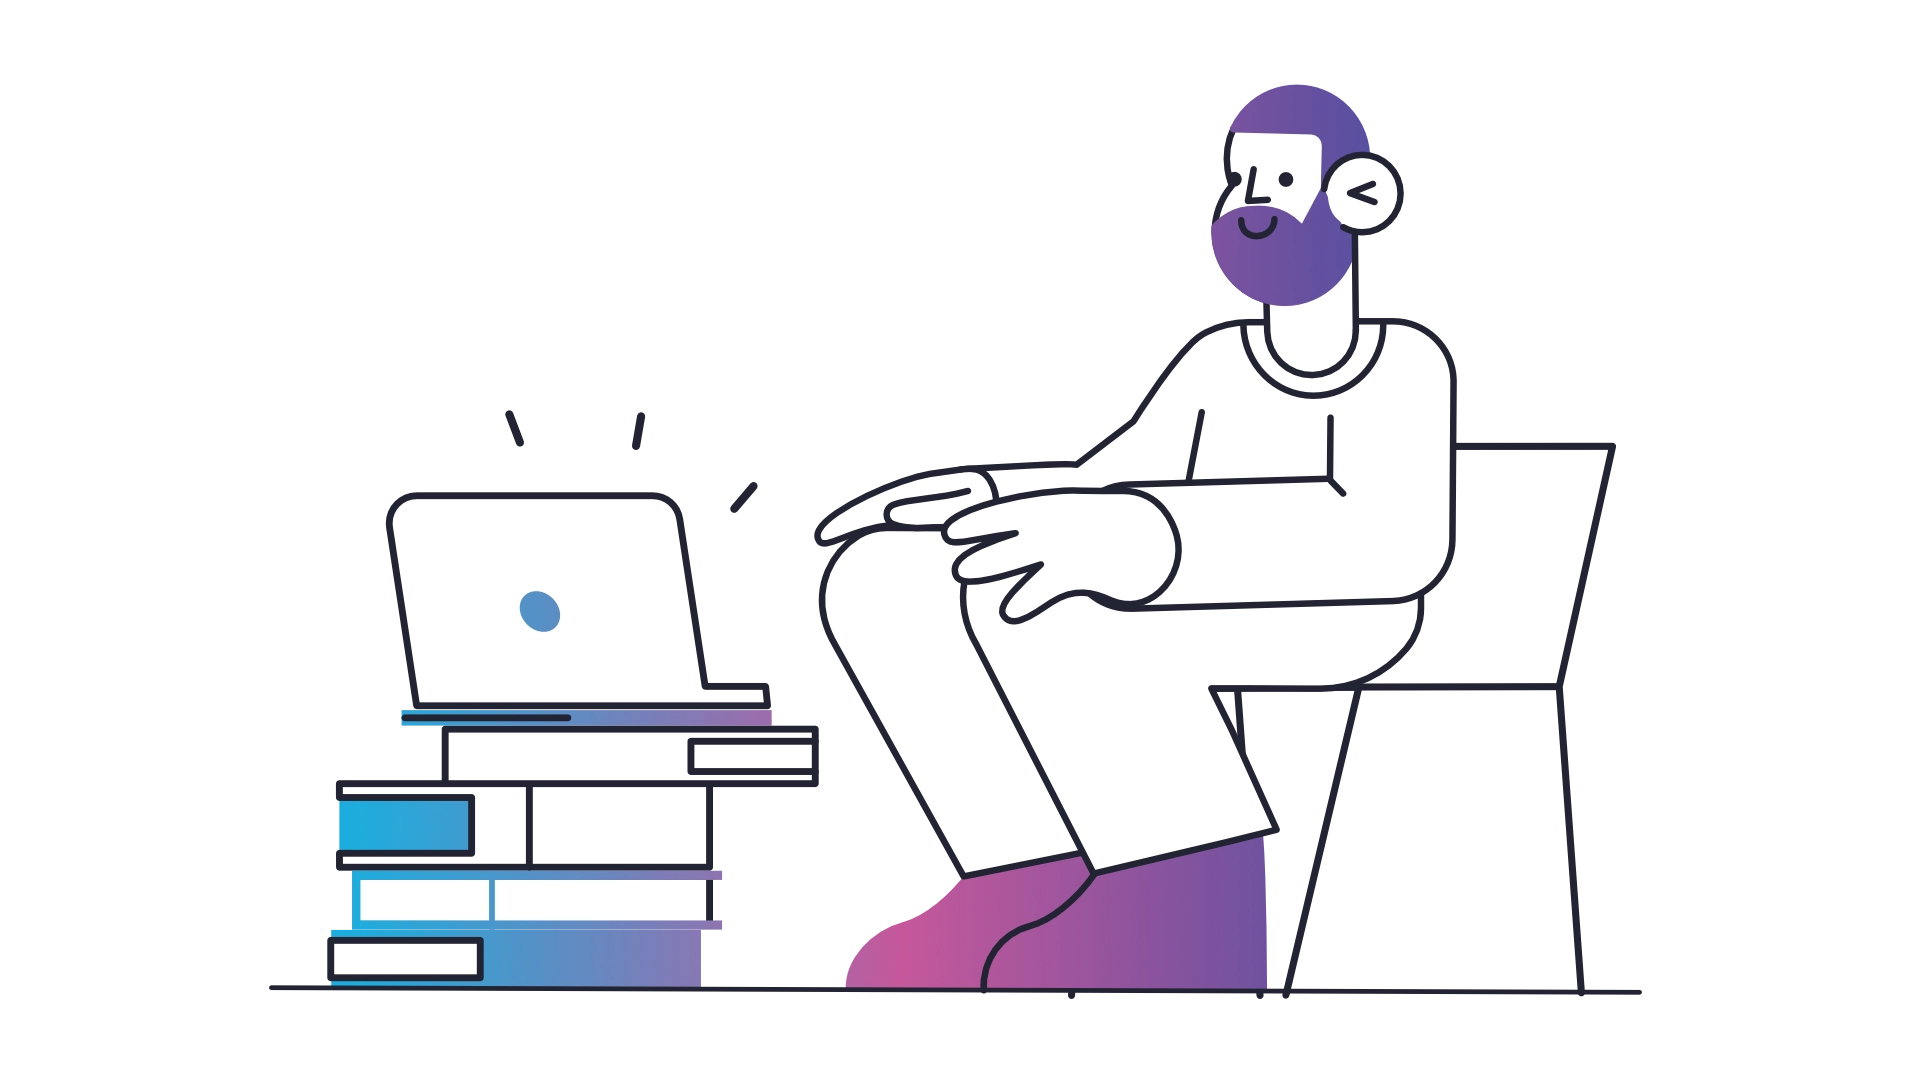 An illustration of a man searching for answers to questions on his laptop.